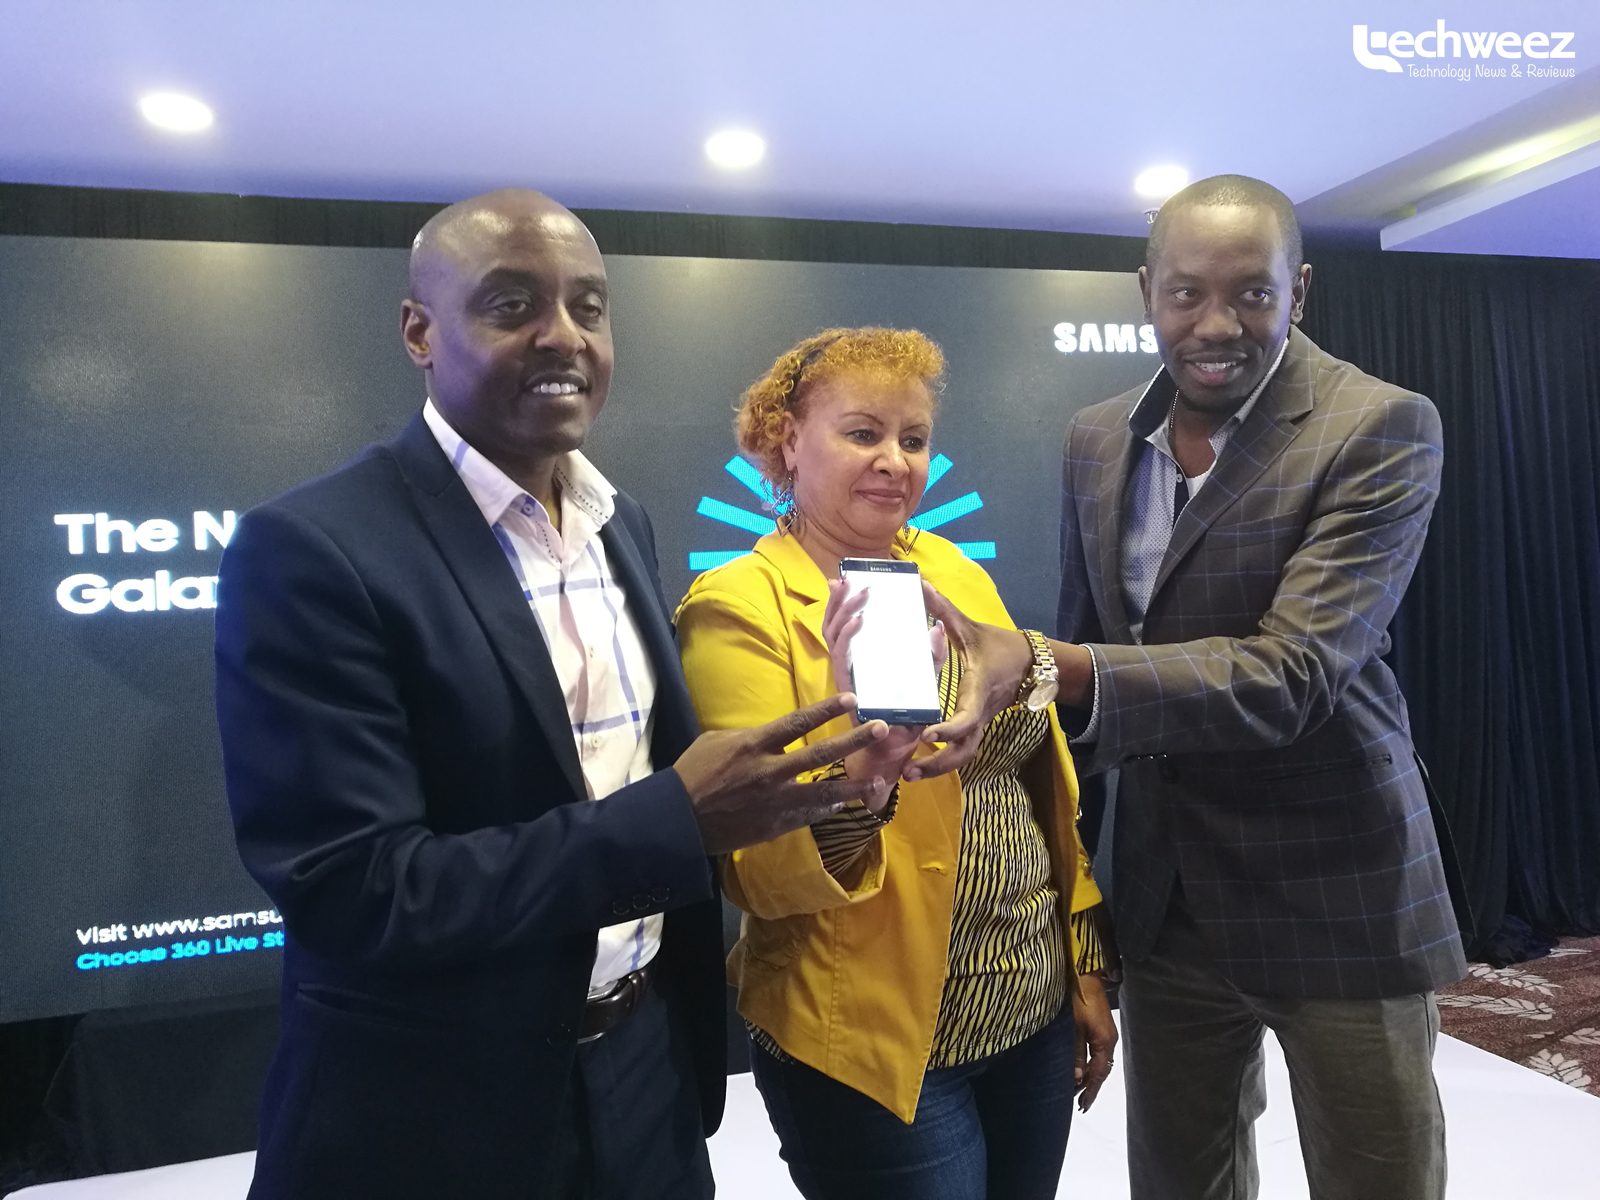 Samsung Electronics East Africa Mobile Business Lead Simon Kariithi shows off the Galaxy Note 5 in Nairobi.